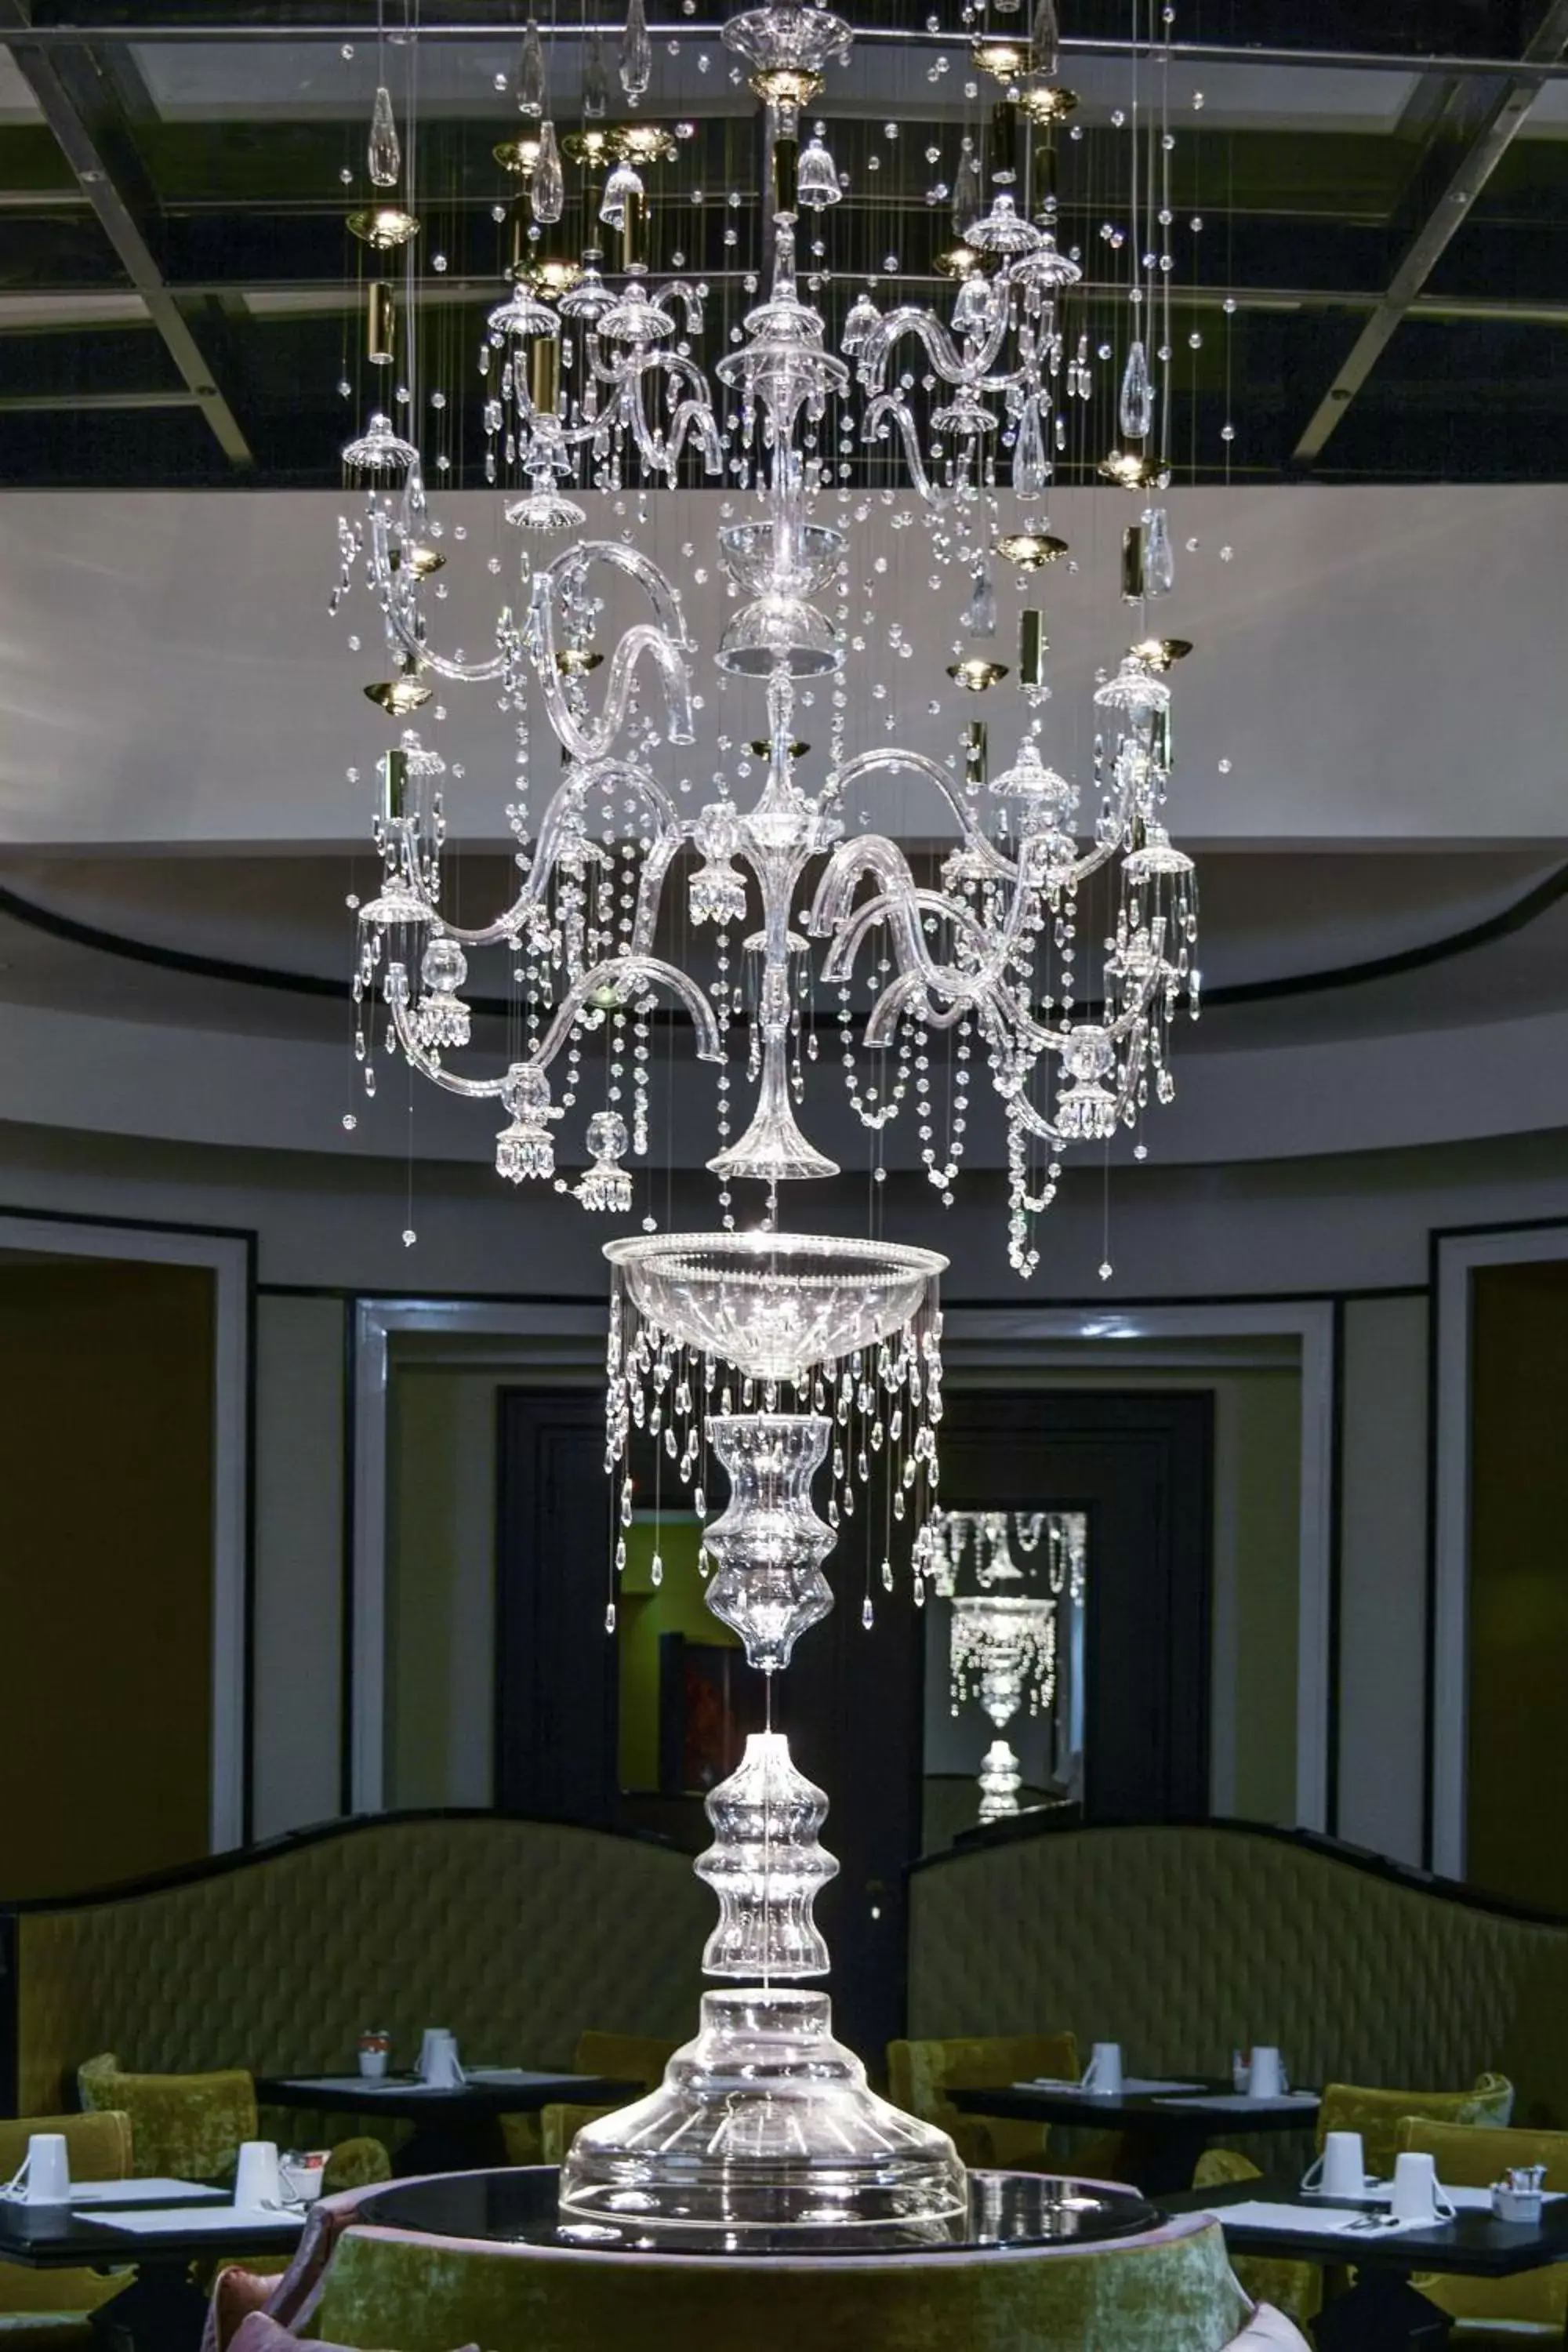 Dining area, Banquet Facilities in Maison Astor Paris, Curio Collection by Hilton